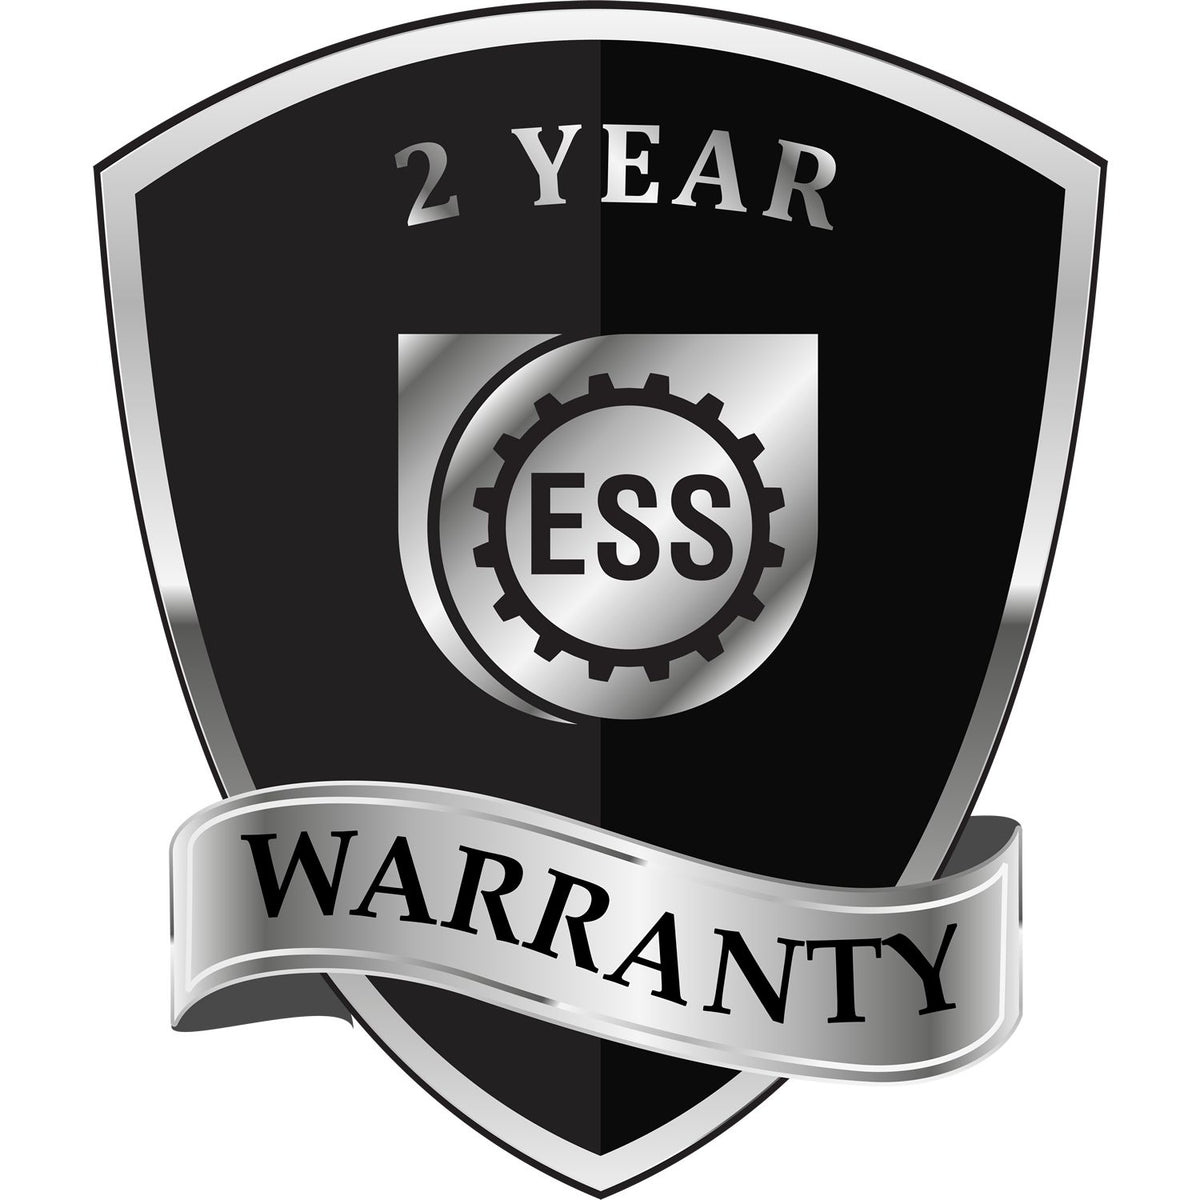 A badge or emblem showing a warranty icon for the Heavy Duty Cast Iron Arizona Architect Embosser